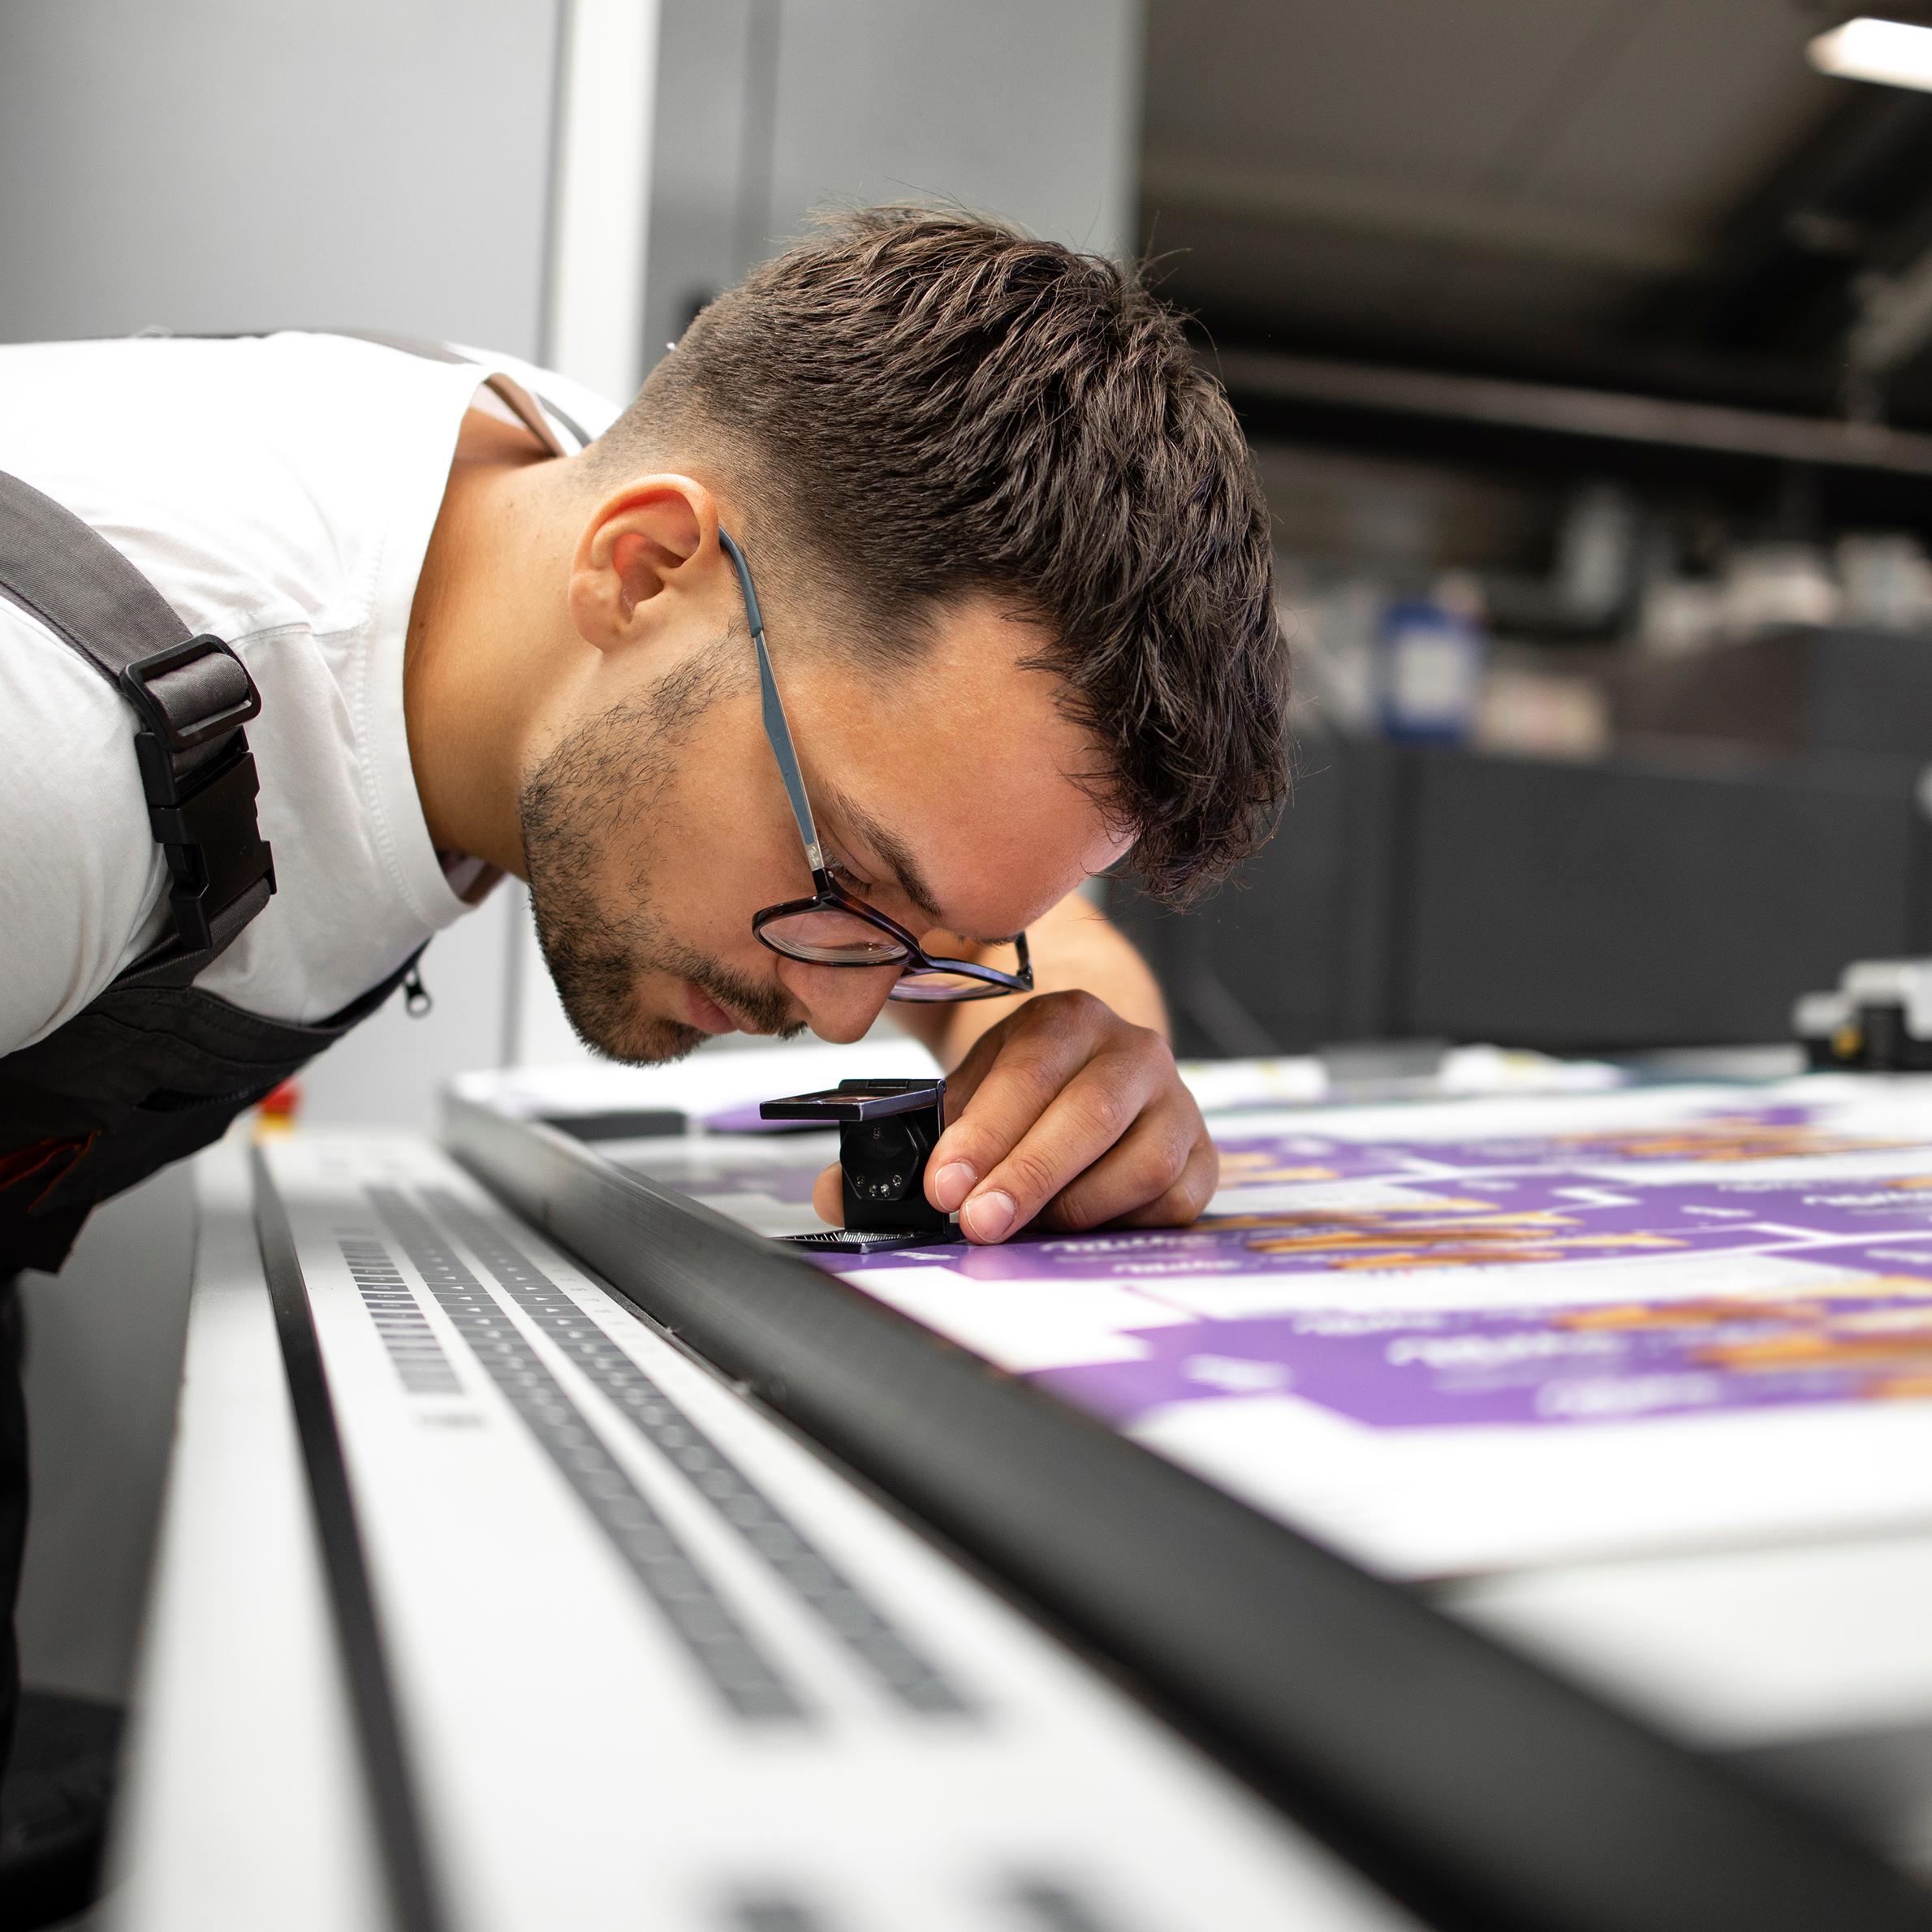 Worker checking print quality of graphics in modern printing house.